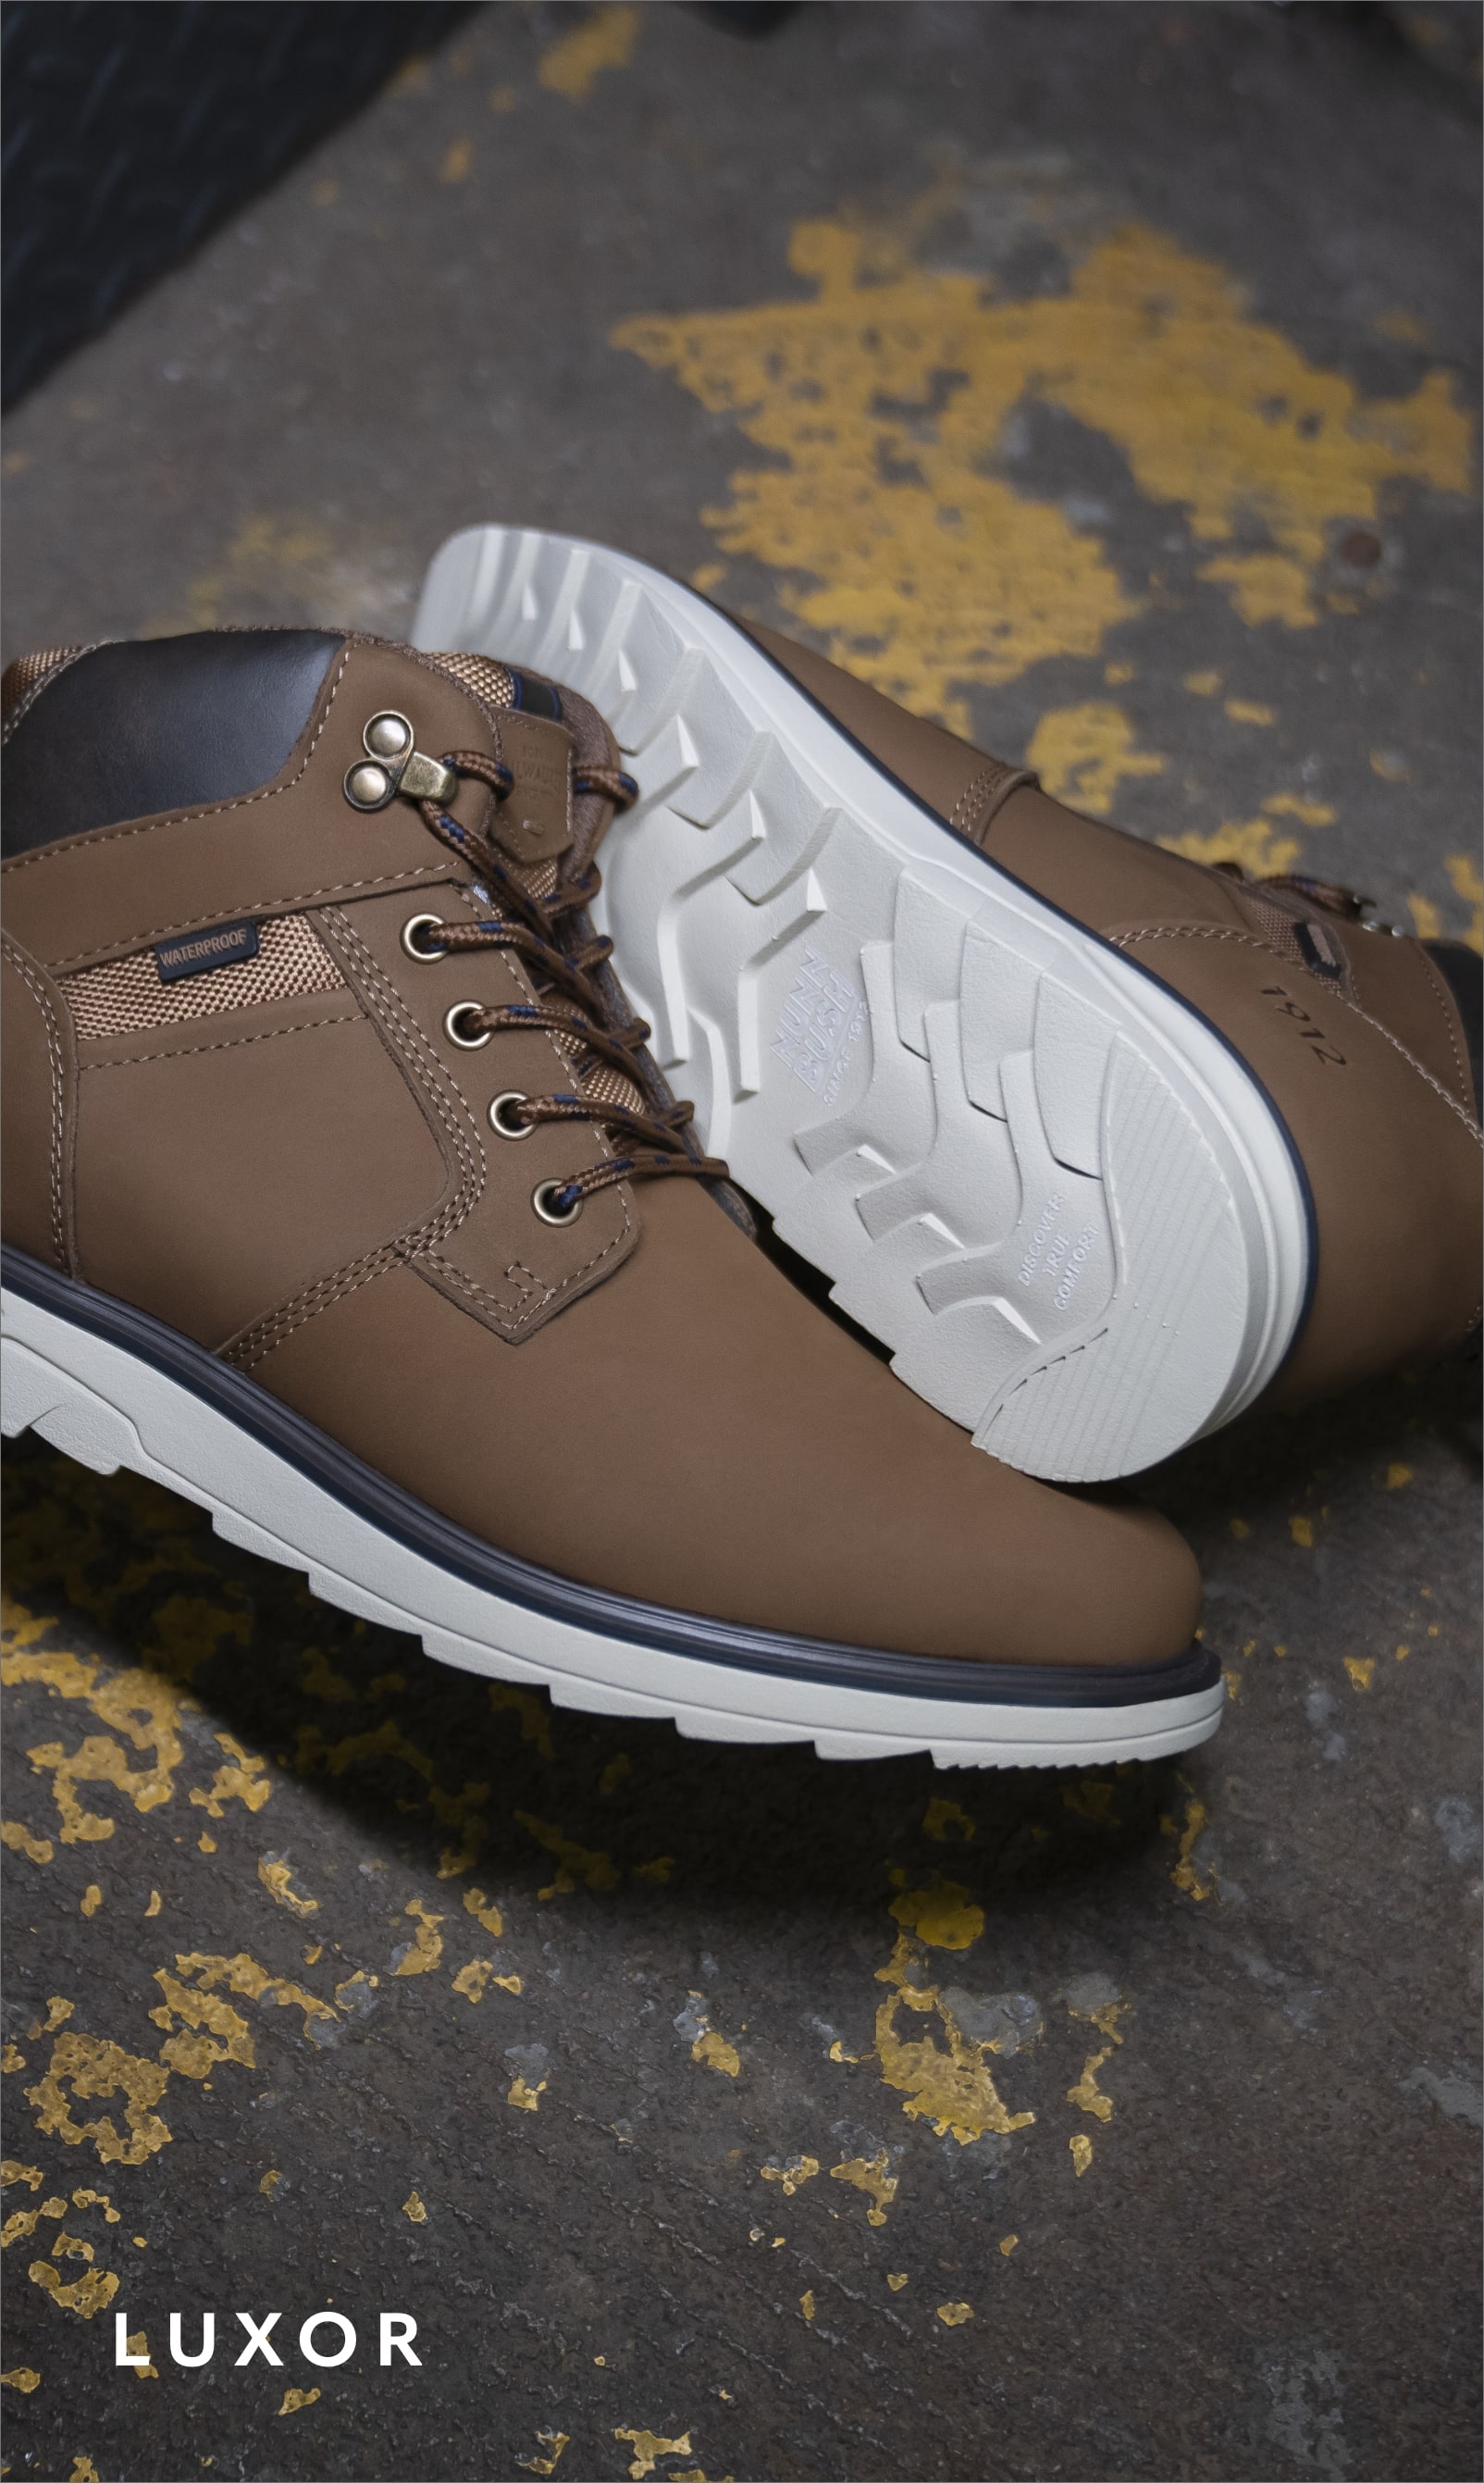 Men's Boots category. Image features the Luxor boot in tan. 